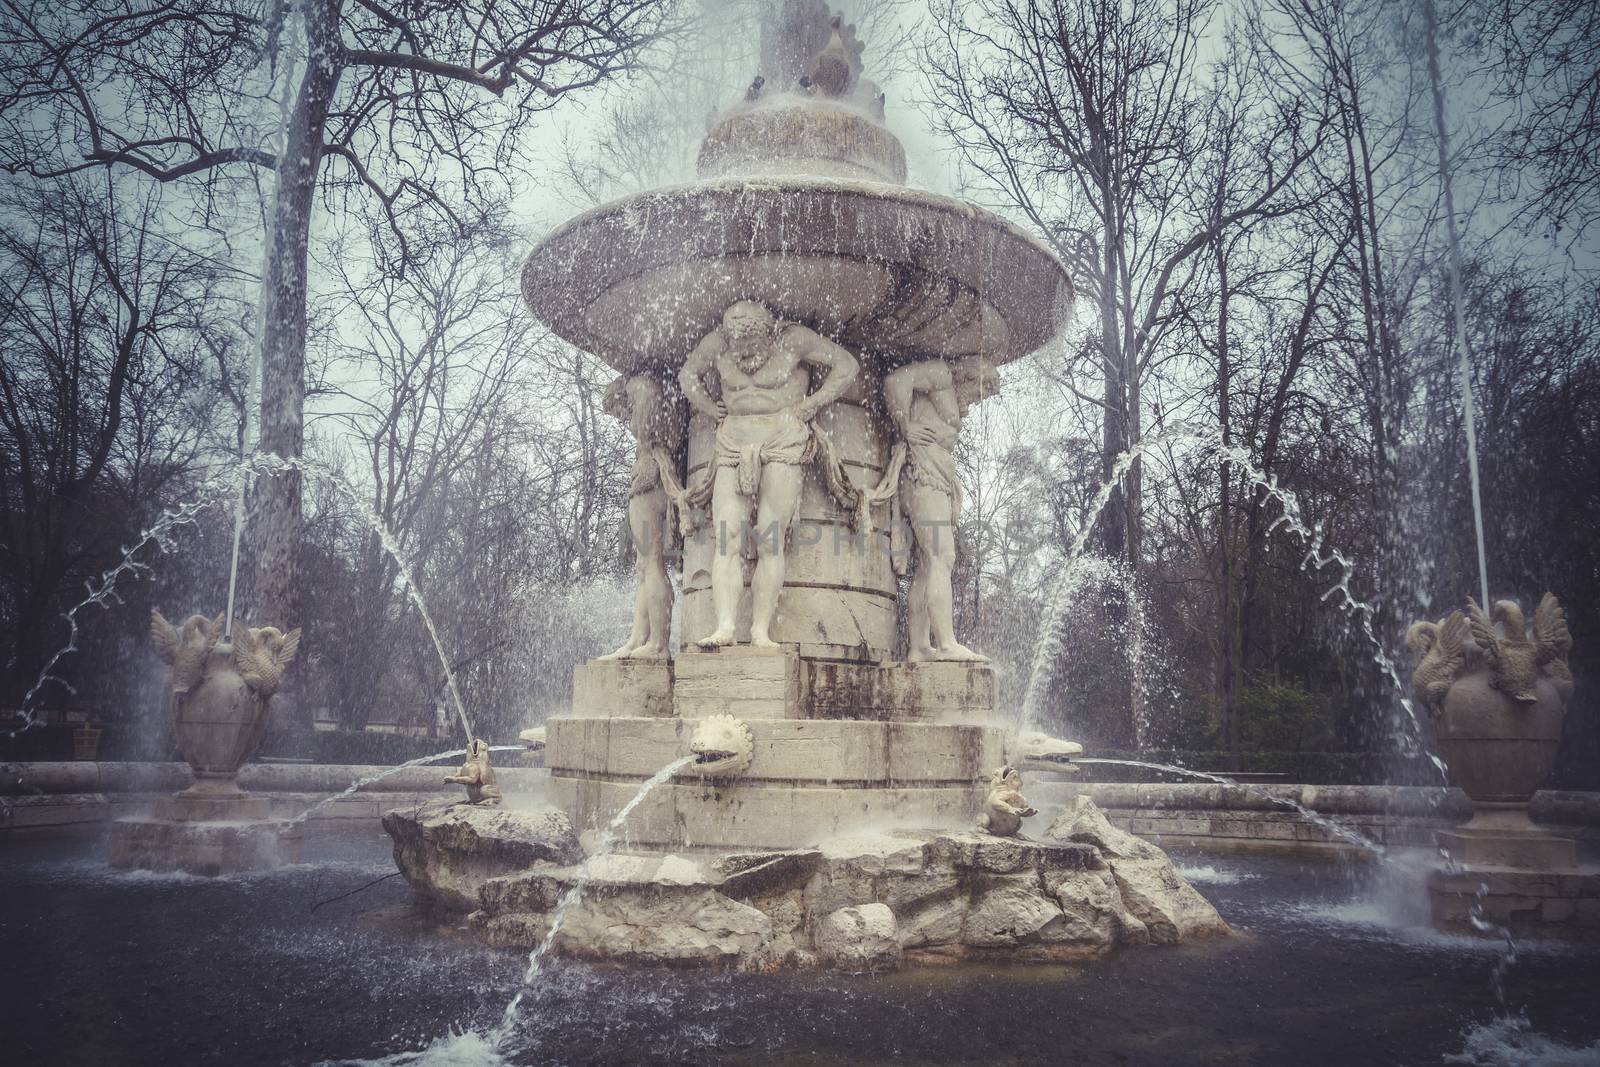 Hercules, Ornamental fountains of the Palace of Aranjuez, Madrid by FernandoCortes